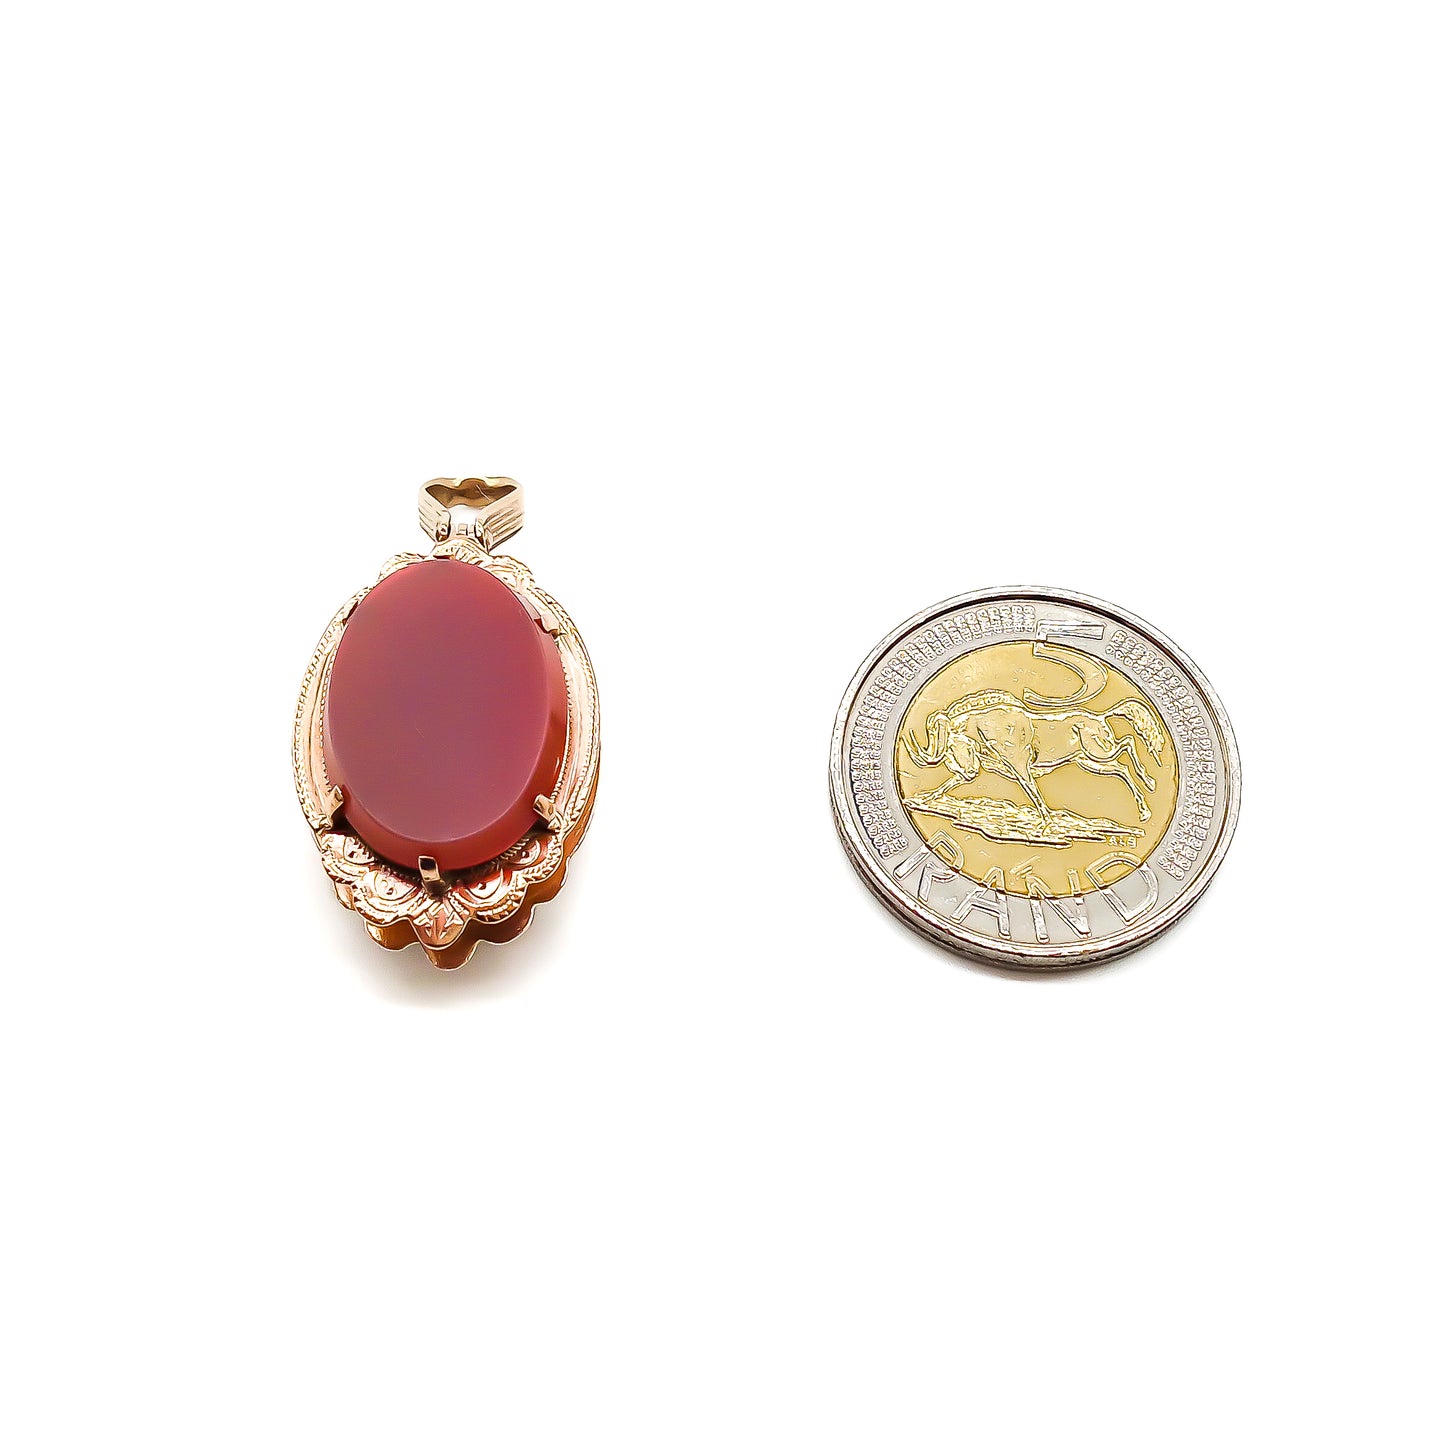 Very unusual and beautifully engraved Victorian 9ct rose gold double-sided fob set with onyx and carnelian.